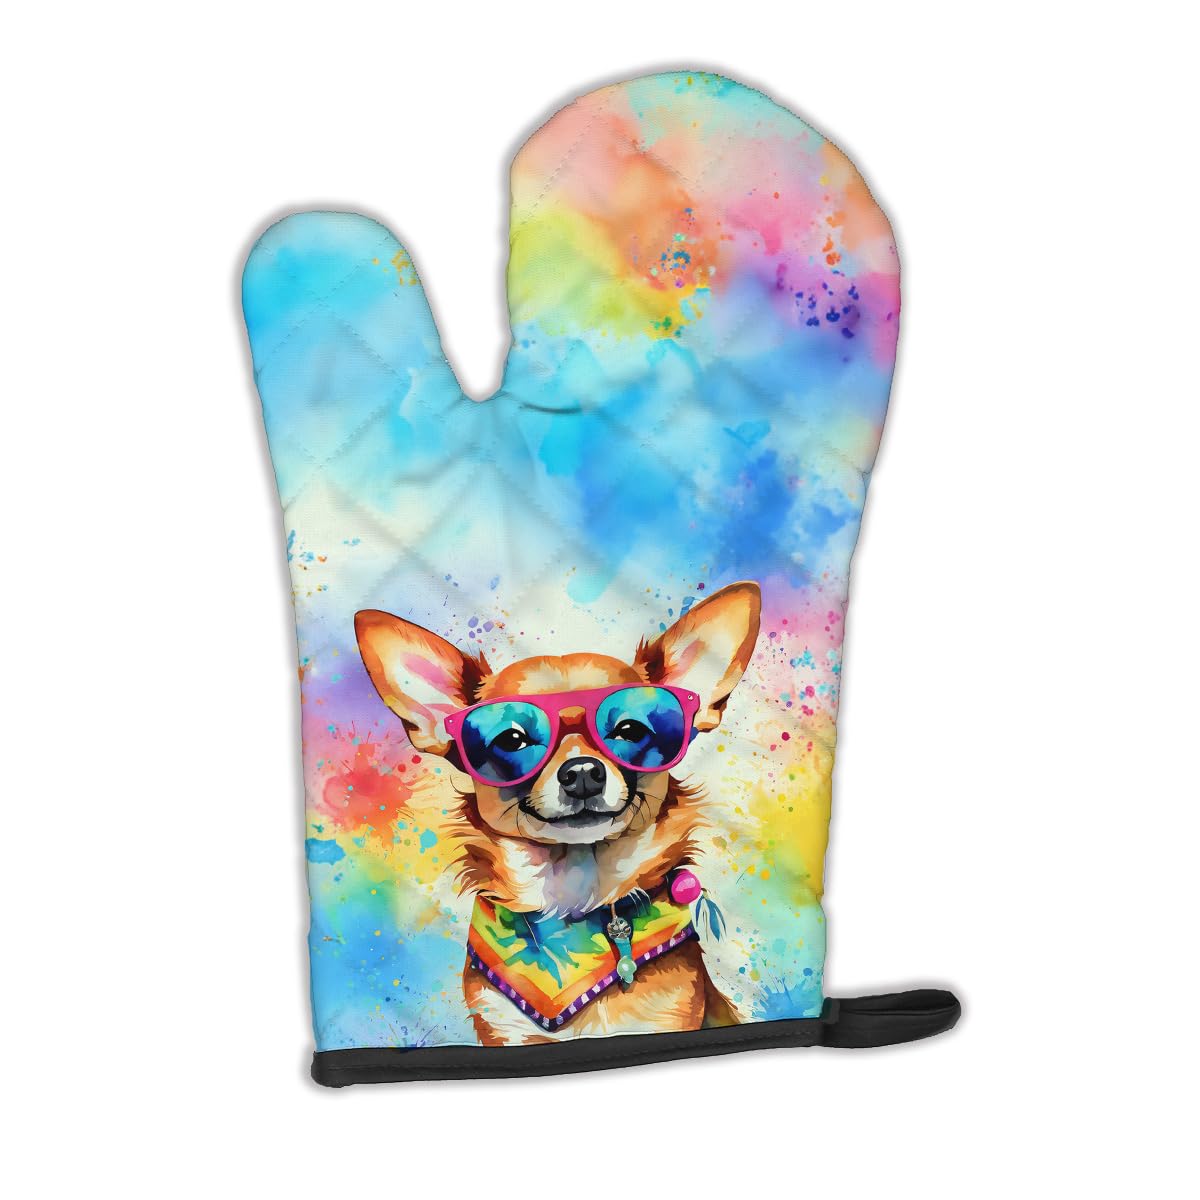 Caroline's Treasures DAC2489OVMT Chihuahua Hippie Dawg Oven Mitt Heat Resistant Thick Oven Mitt for Hot Pans and Oven, Kitchen Mitt Protect Hands, Cooking Baking Glove